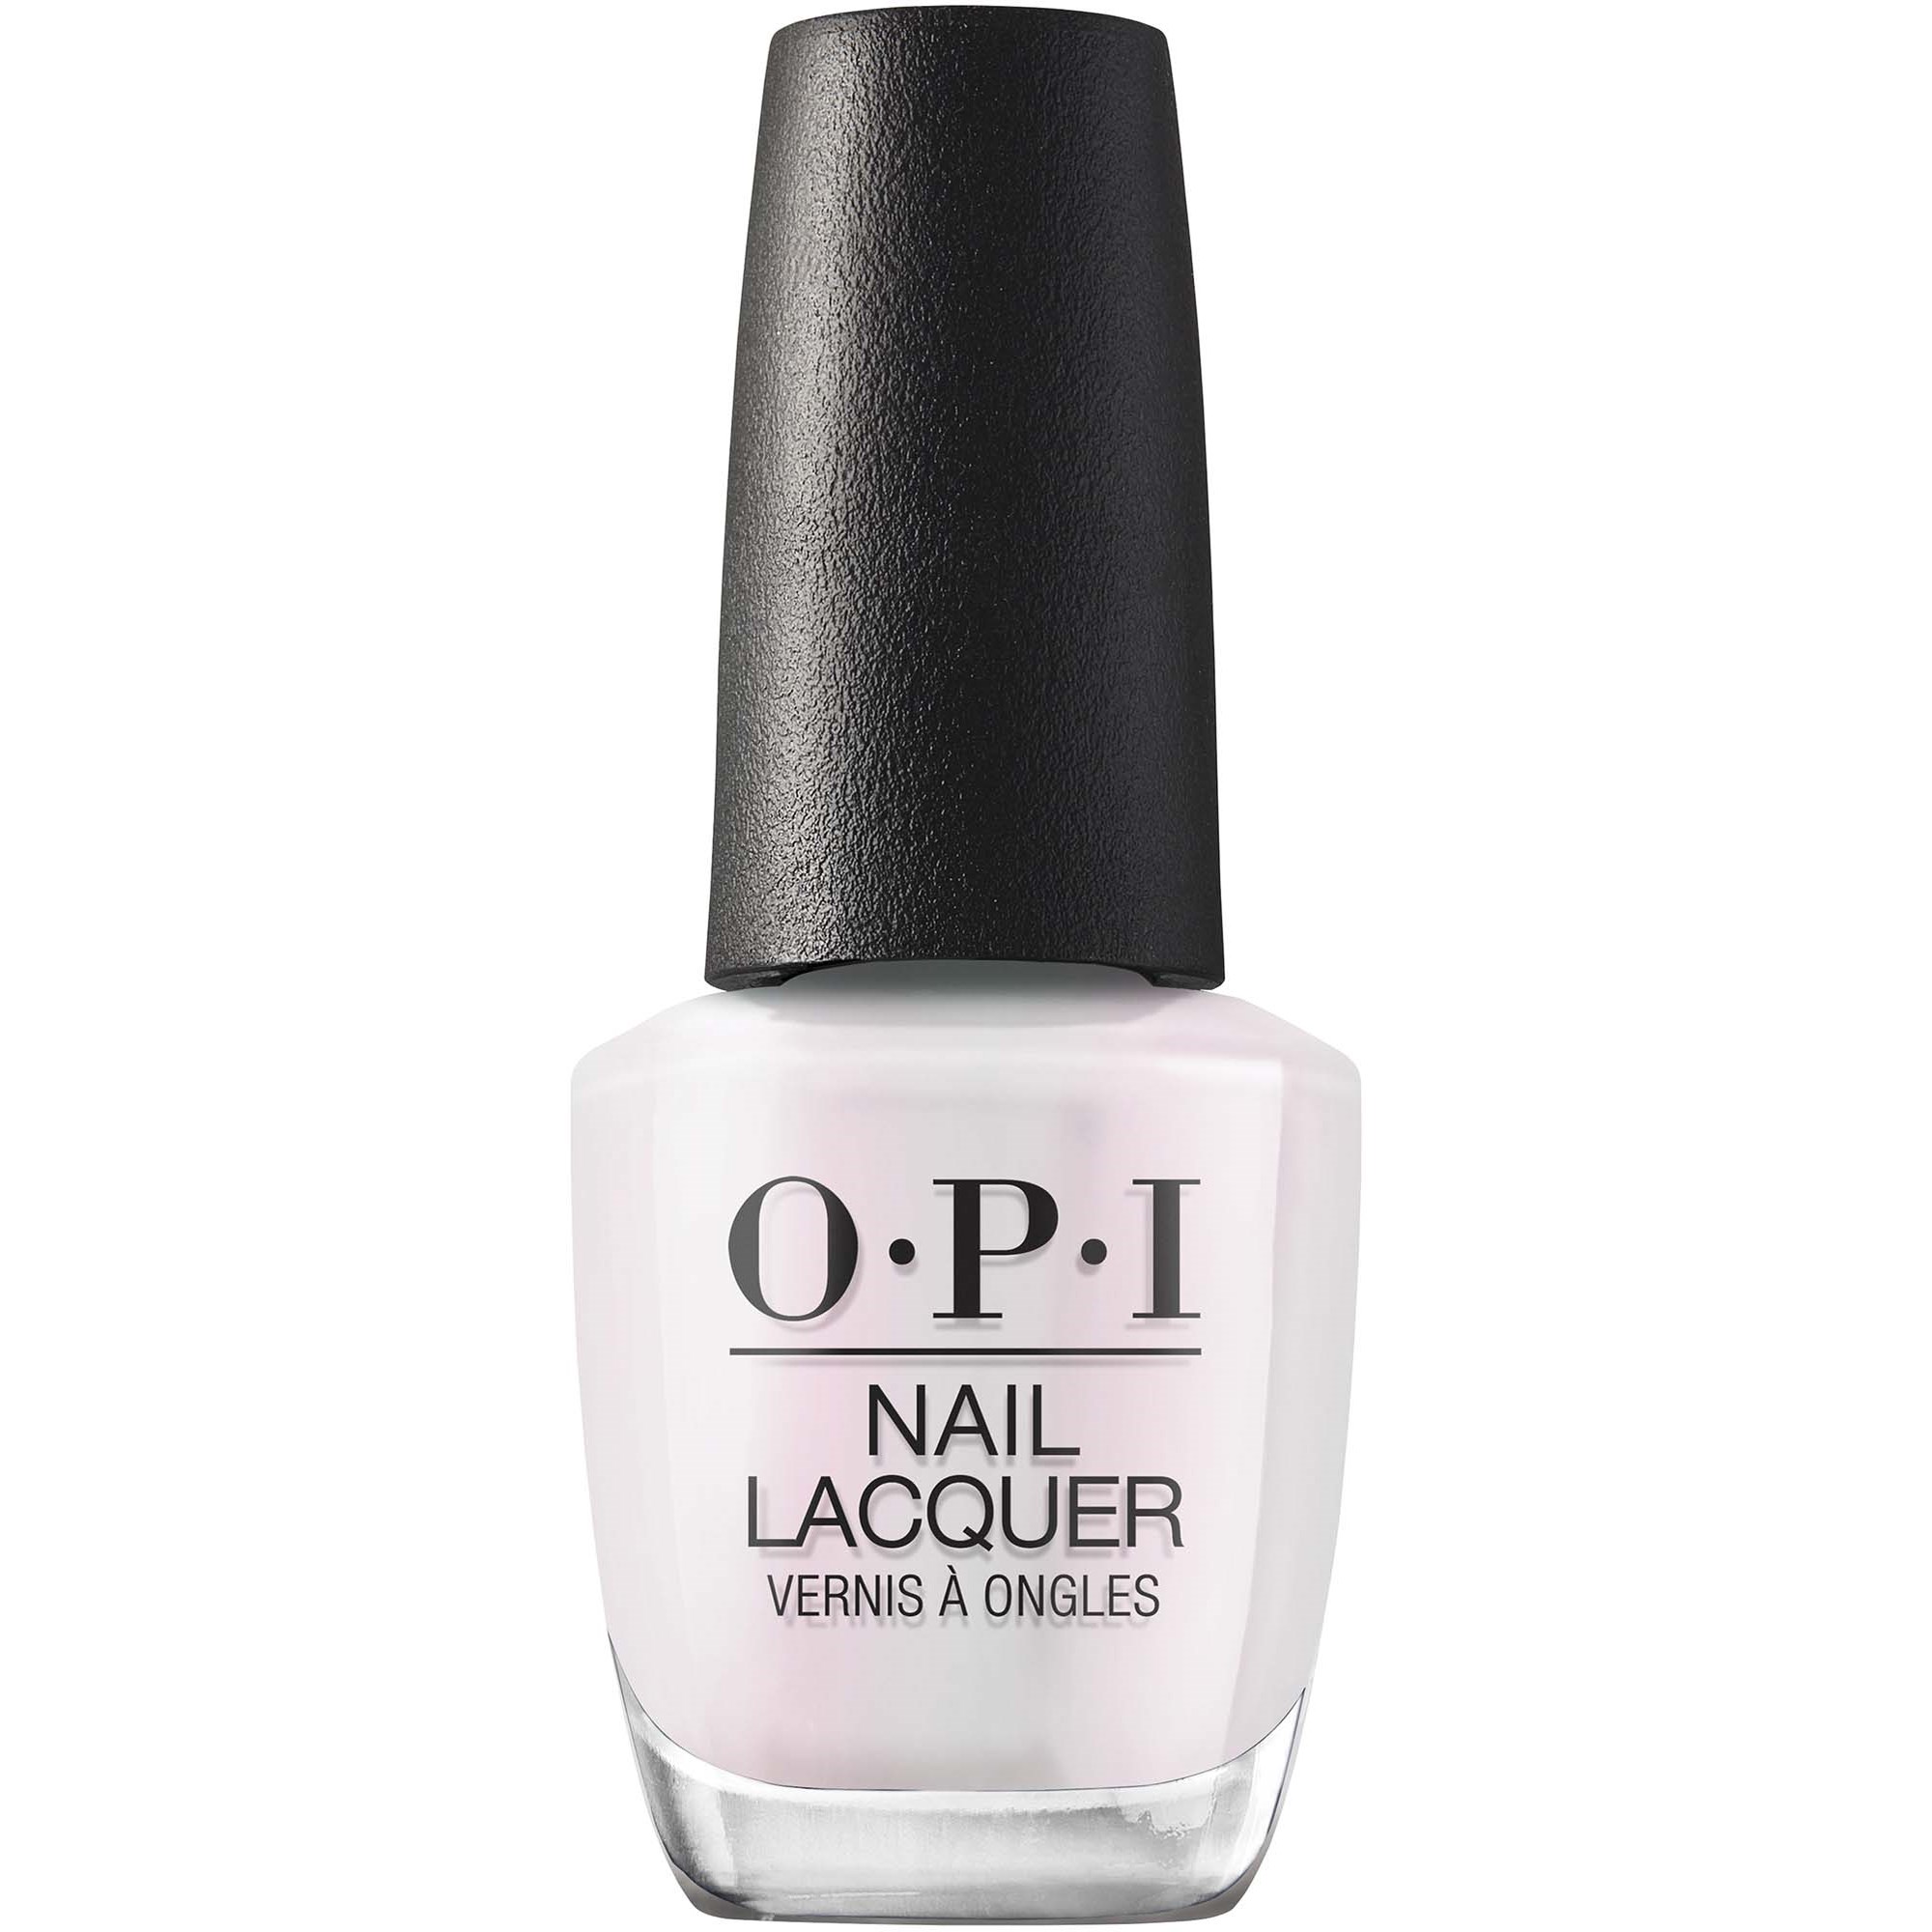 Opi Nail Lacquer Your Way Glazed N' Amused - Silver